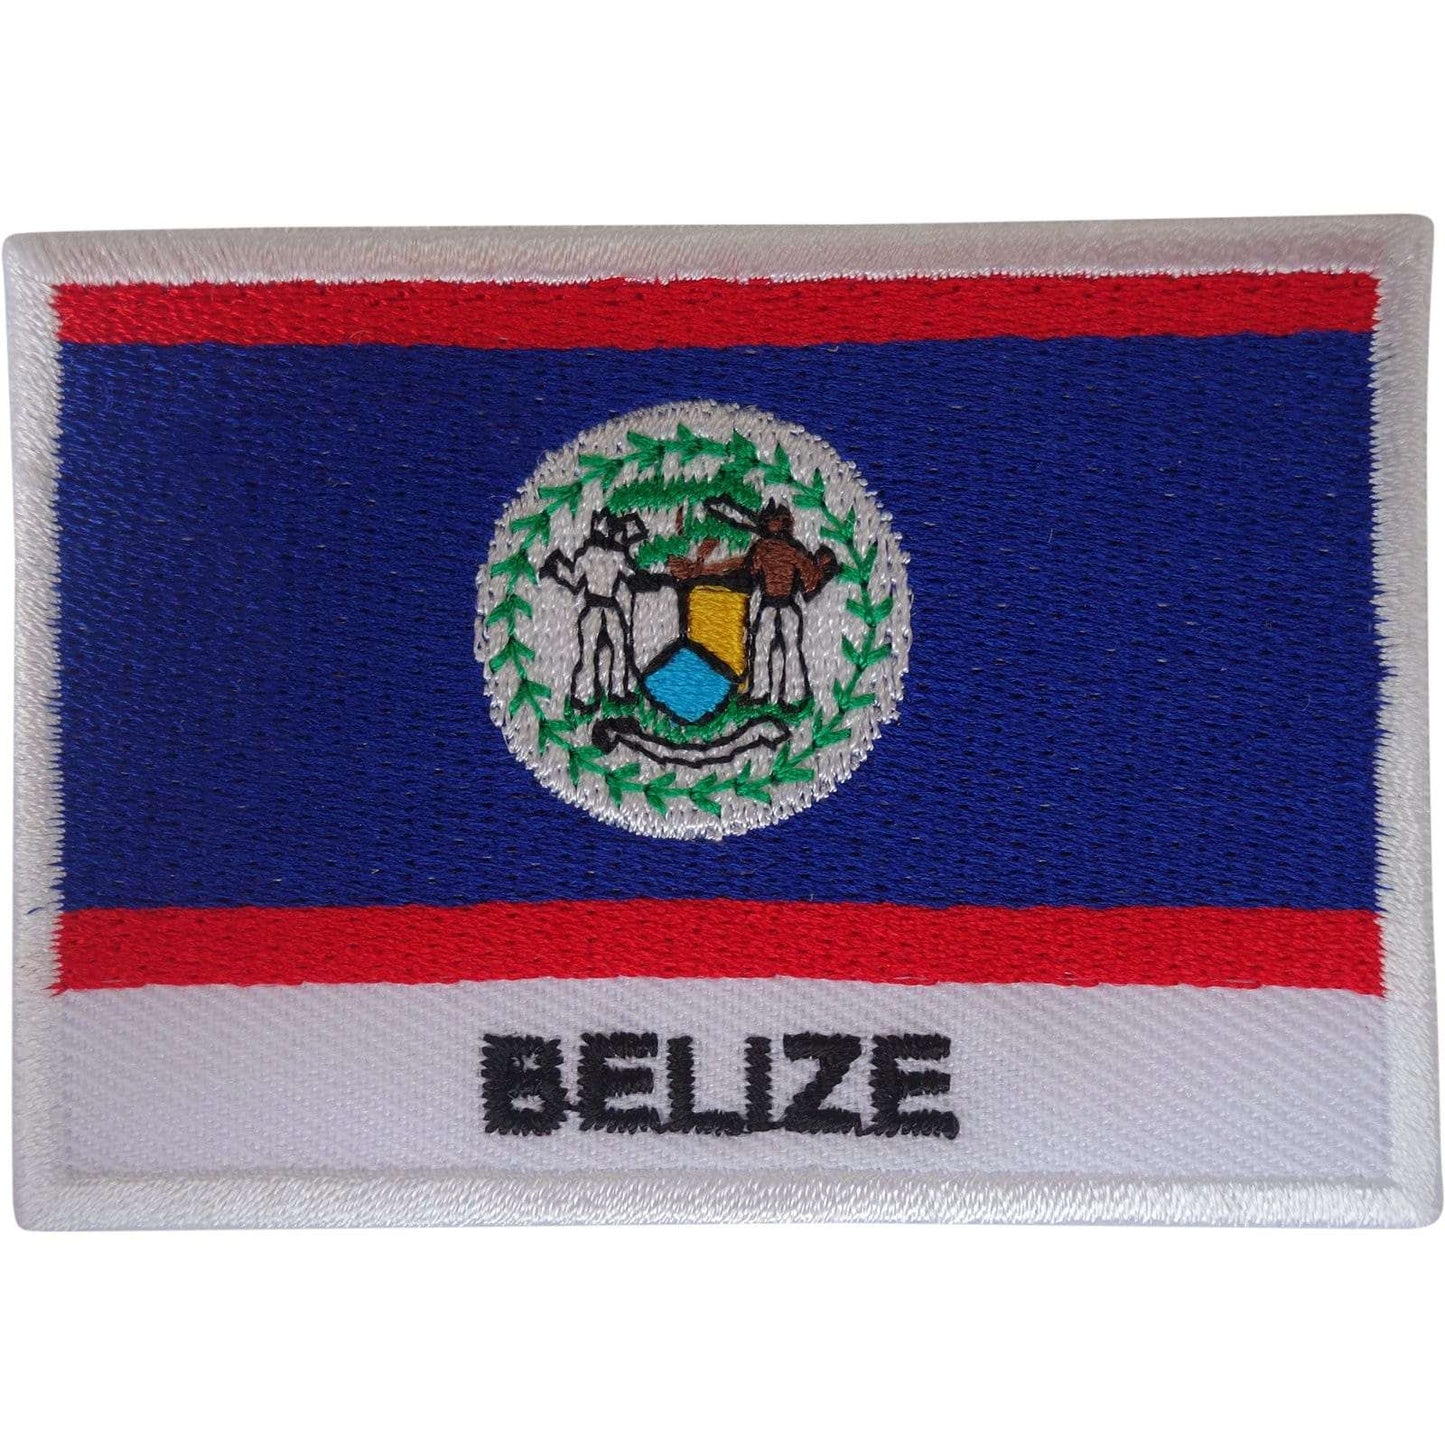 Belize Flag Patch Iron On Sew On Clothes Bag Caribbean America Embroidered Badge